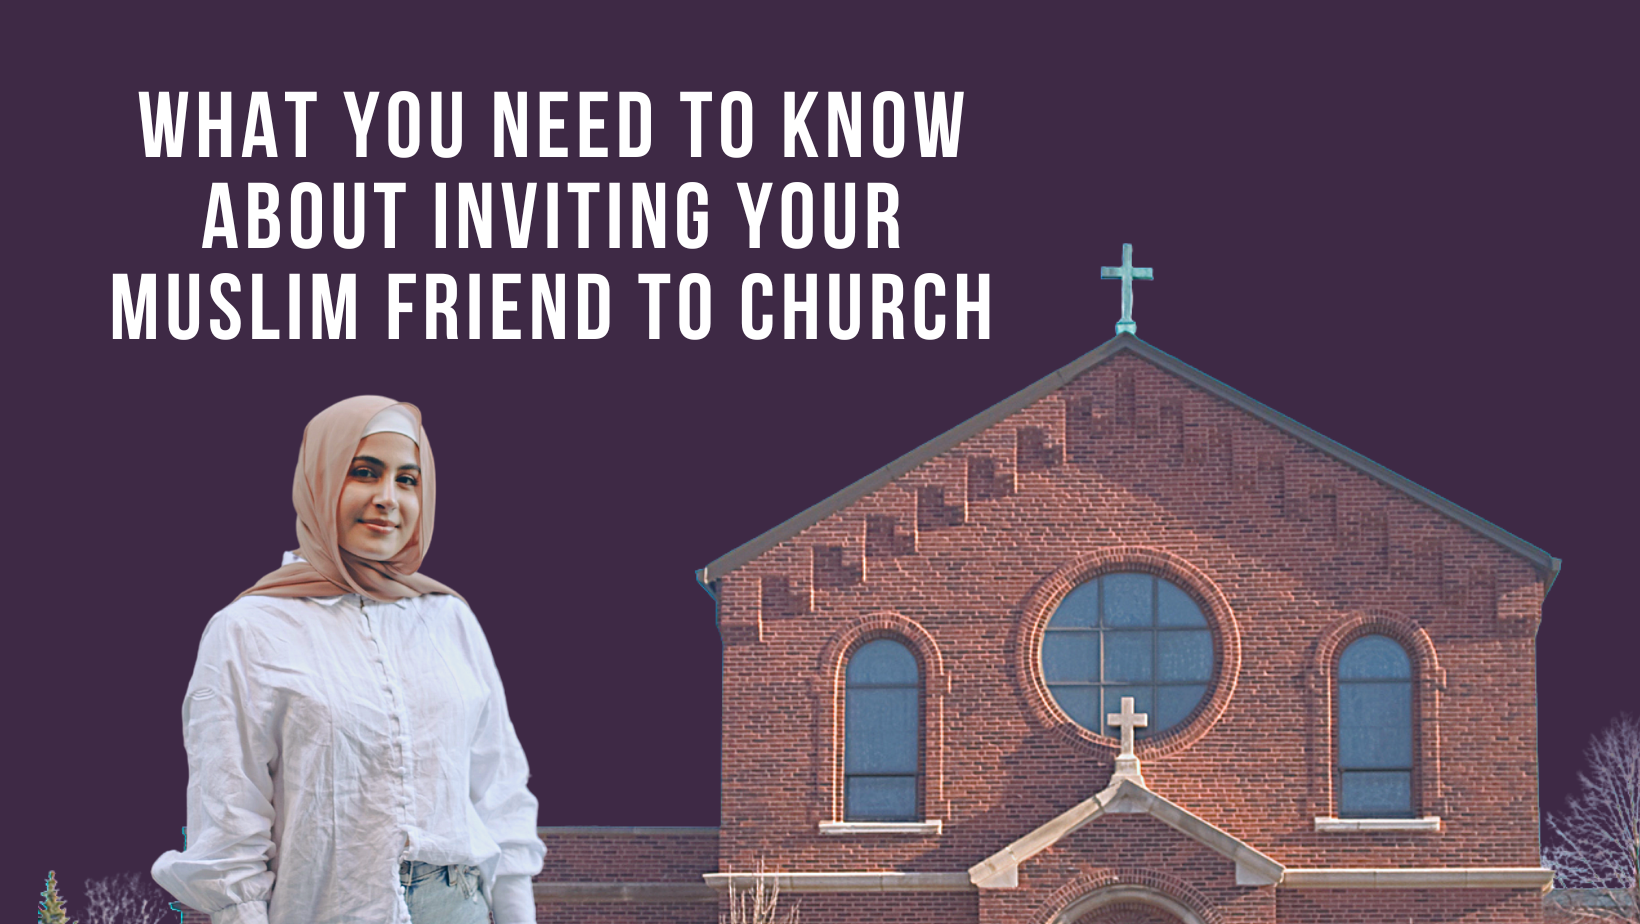 What you need to know about inviting your Muslim friend to church